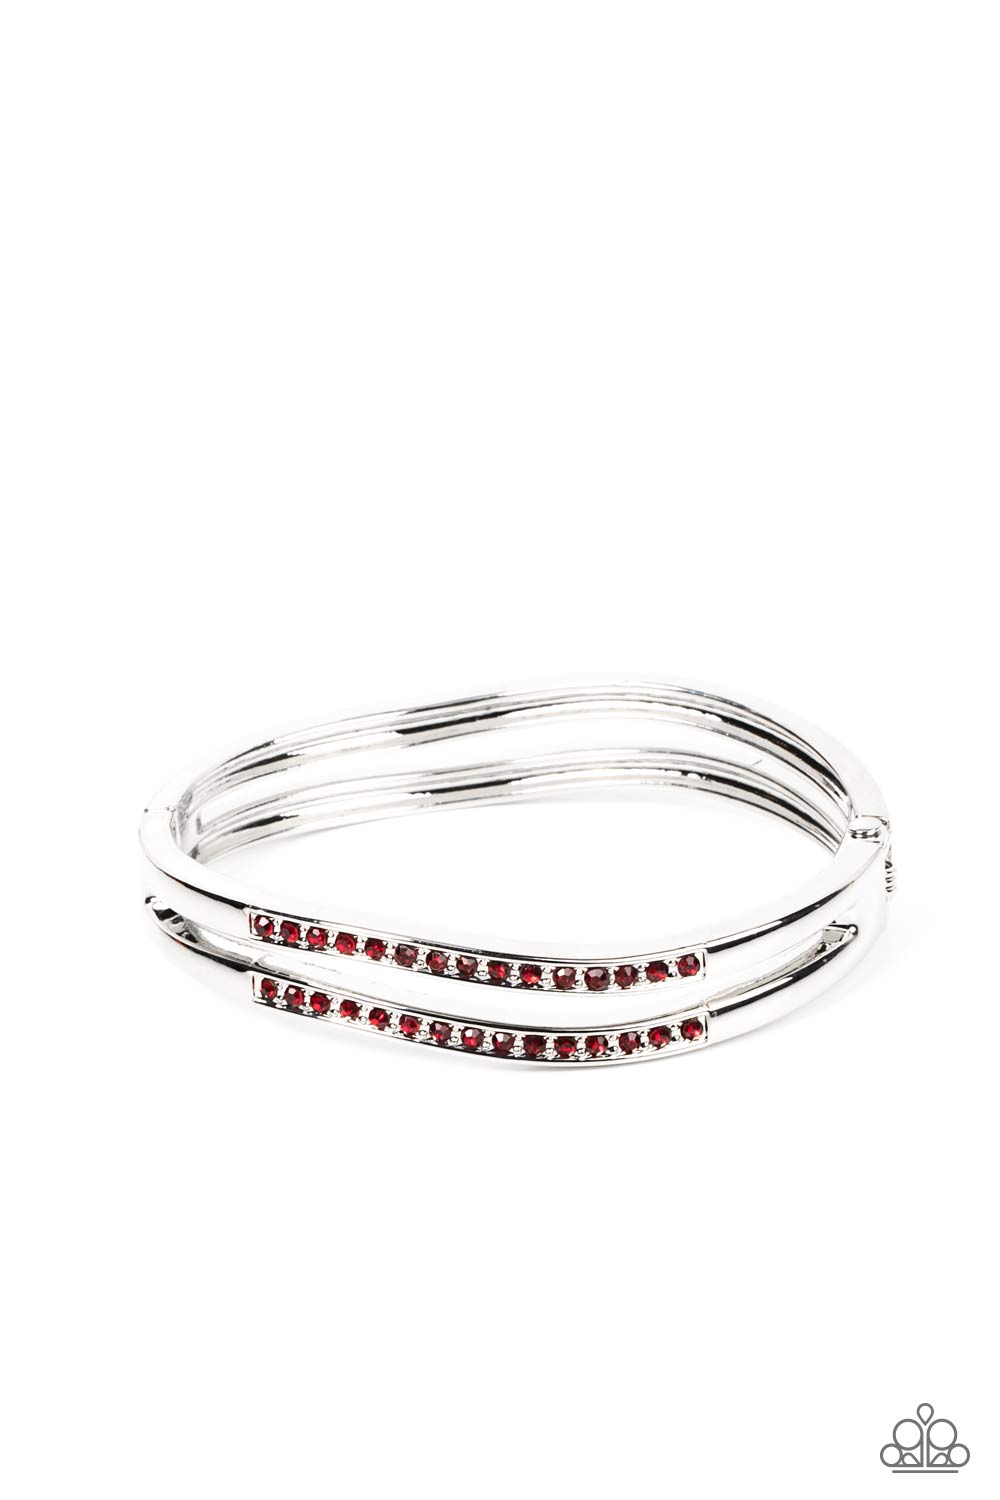 Gen Z Glamour Red Bracelet - Paparazzi Accessories  Wavy rows of silver hinge into an airy bangle-like bracelet around the wrist. Fiery red rhinestones are sprinkled across the front of the trendy centerpiece, adding a spritz of glitz to the versatile design. Features a hinged closure.  Sold as one individual bracelet.